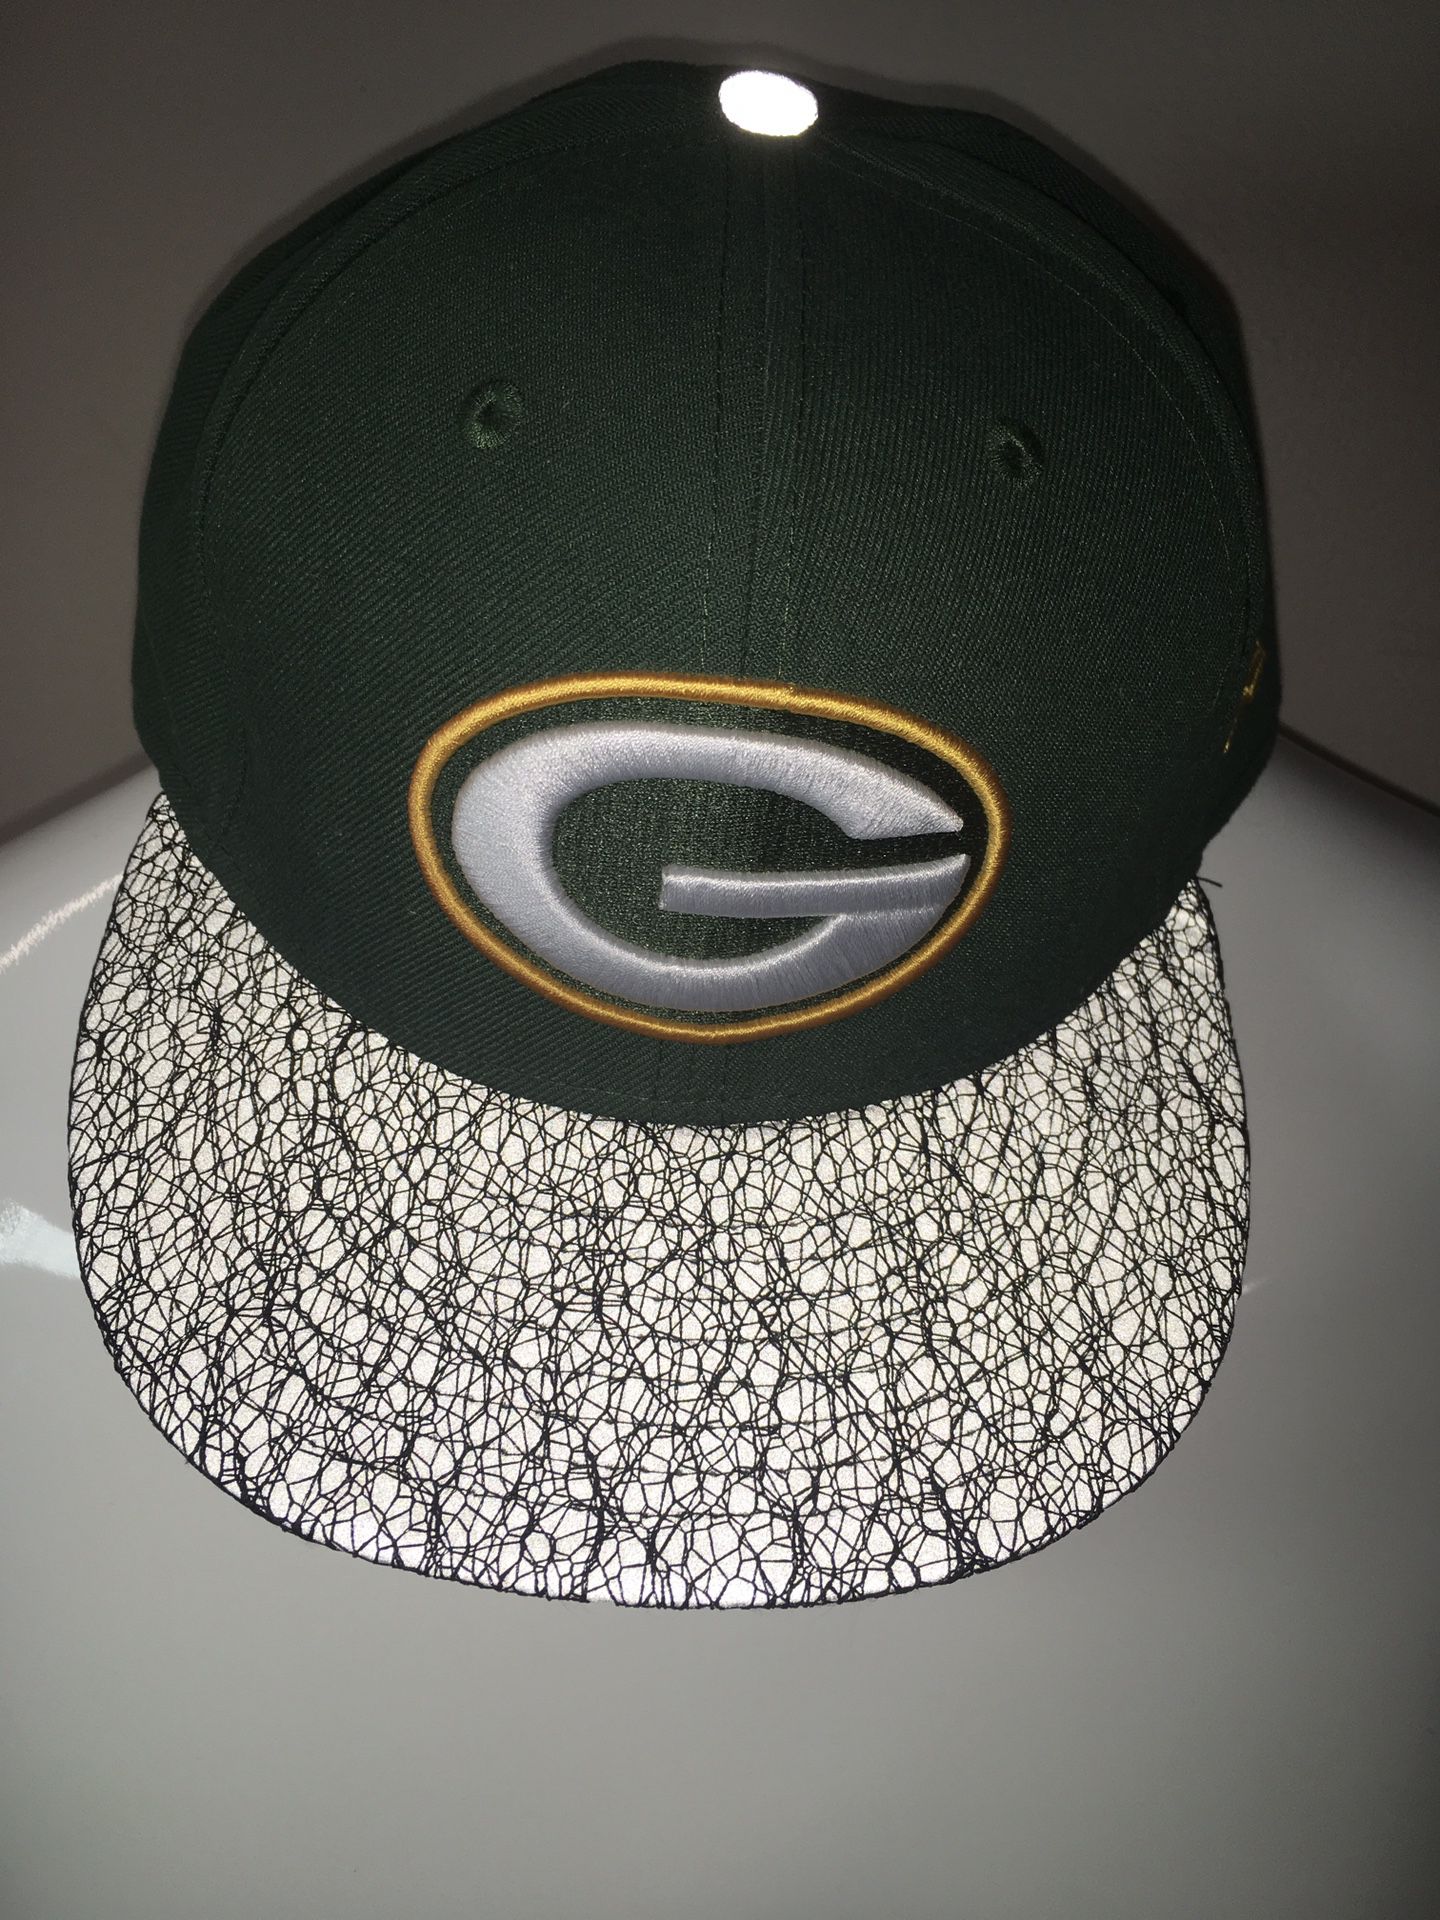 New Era 9Fifty Green Bay Packers Reflective Snapback Baseball Hat NEW Cap ( I have many Packers jerseys posted, please check ) Thank 